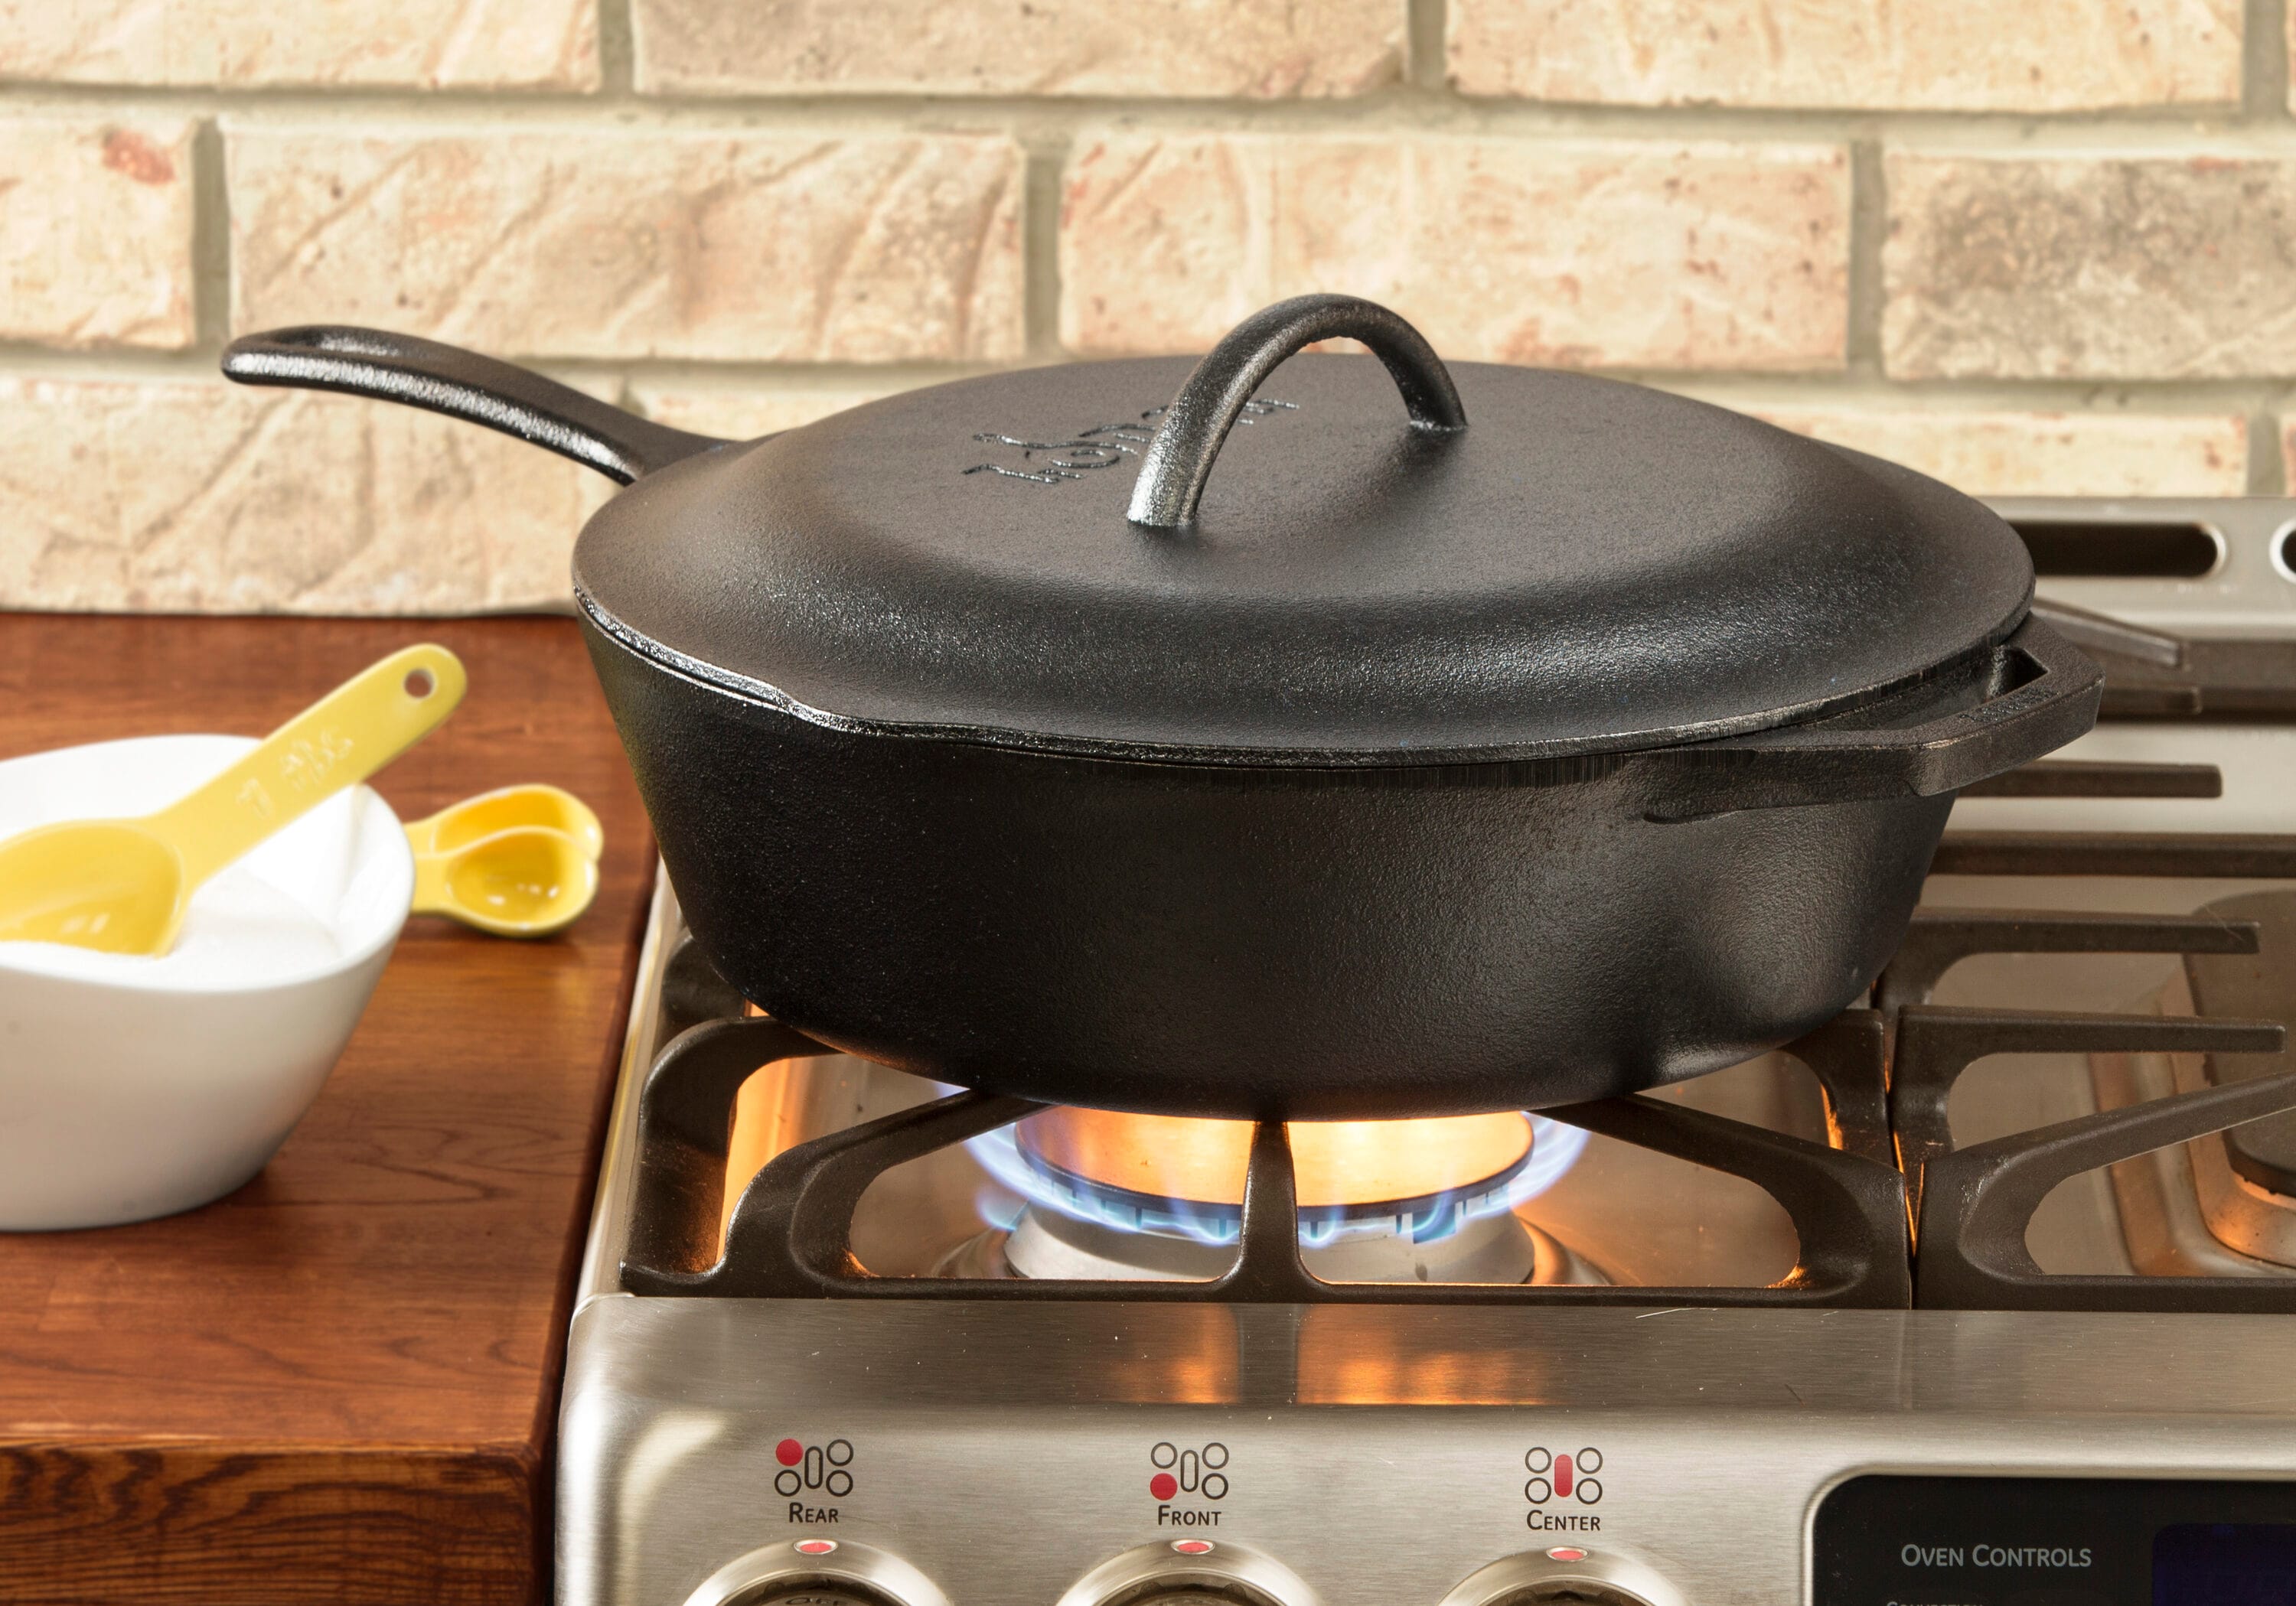 Lodge Cast Iron 5 Quart/12 Inch Cast Iron Covered Deep Skillet - Black,  Oven Safe, Seasoned, Versatile Cooking Pot in the Cooking Pots department  at